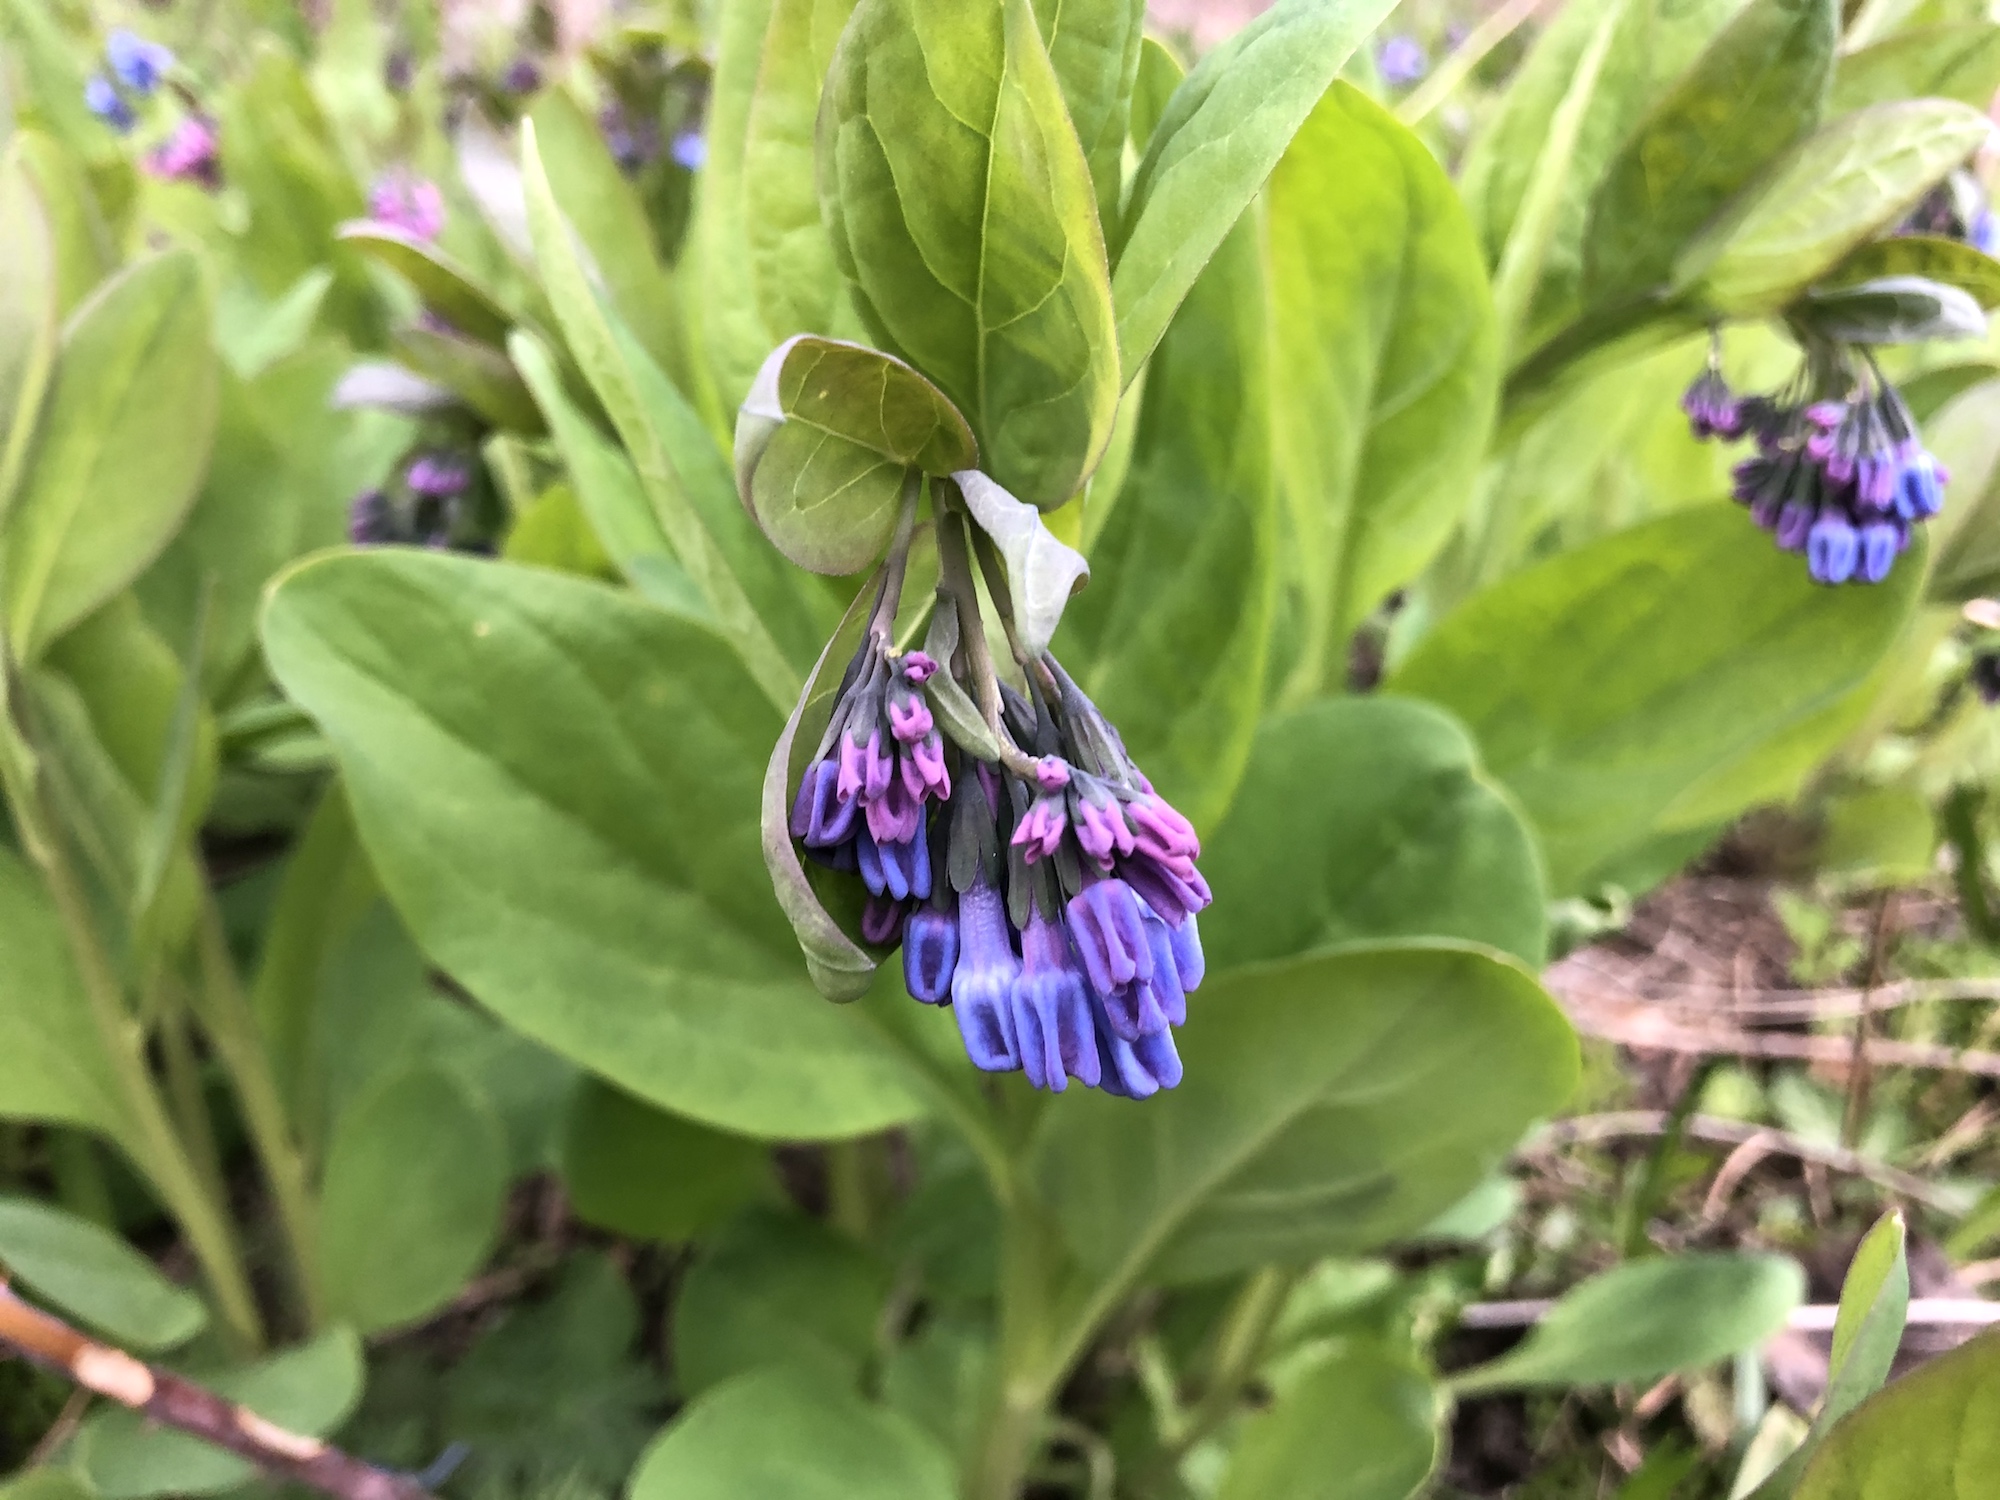 Virginia Bluebells in woods between Marion Dunn and Oak Savanna in Madison, Wisconsin on April 22, 2020.